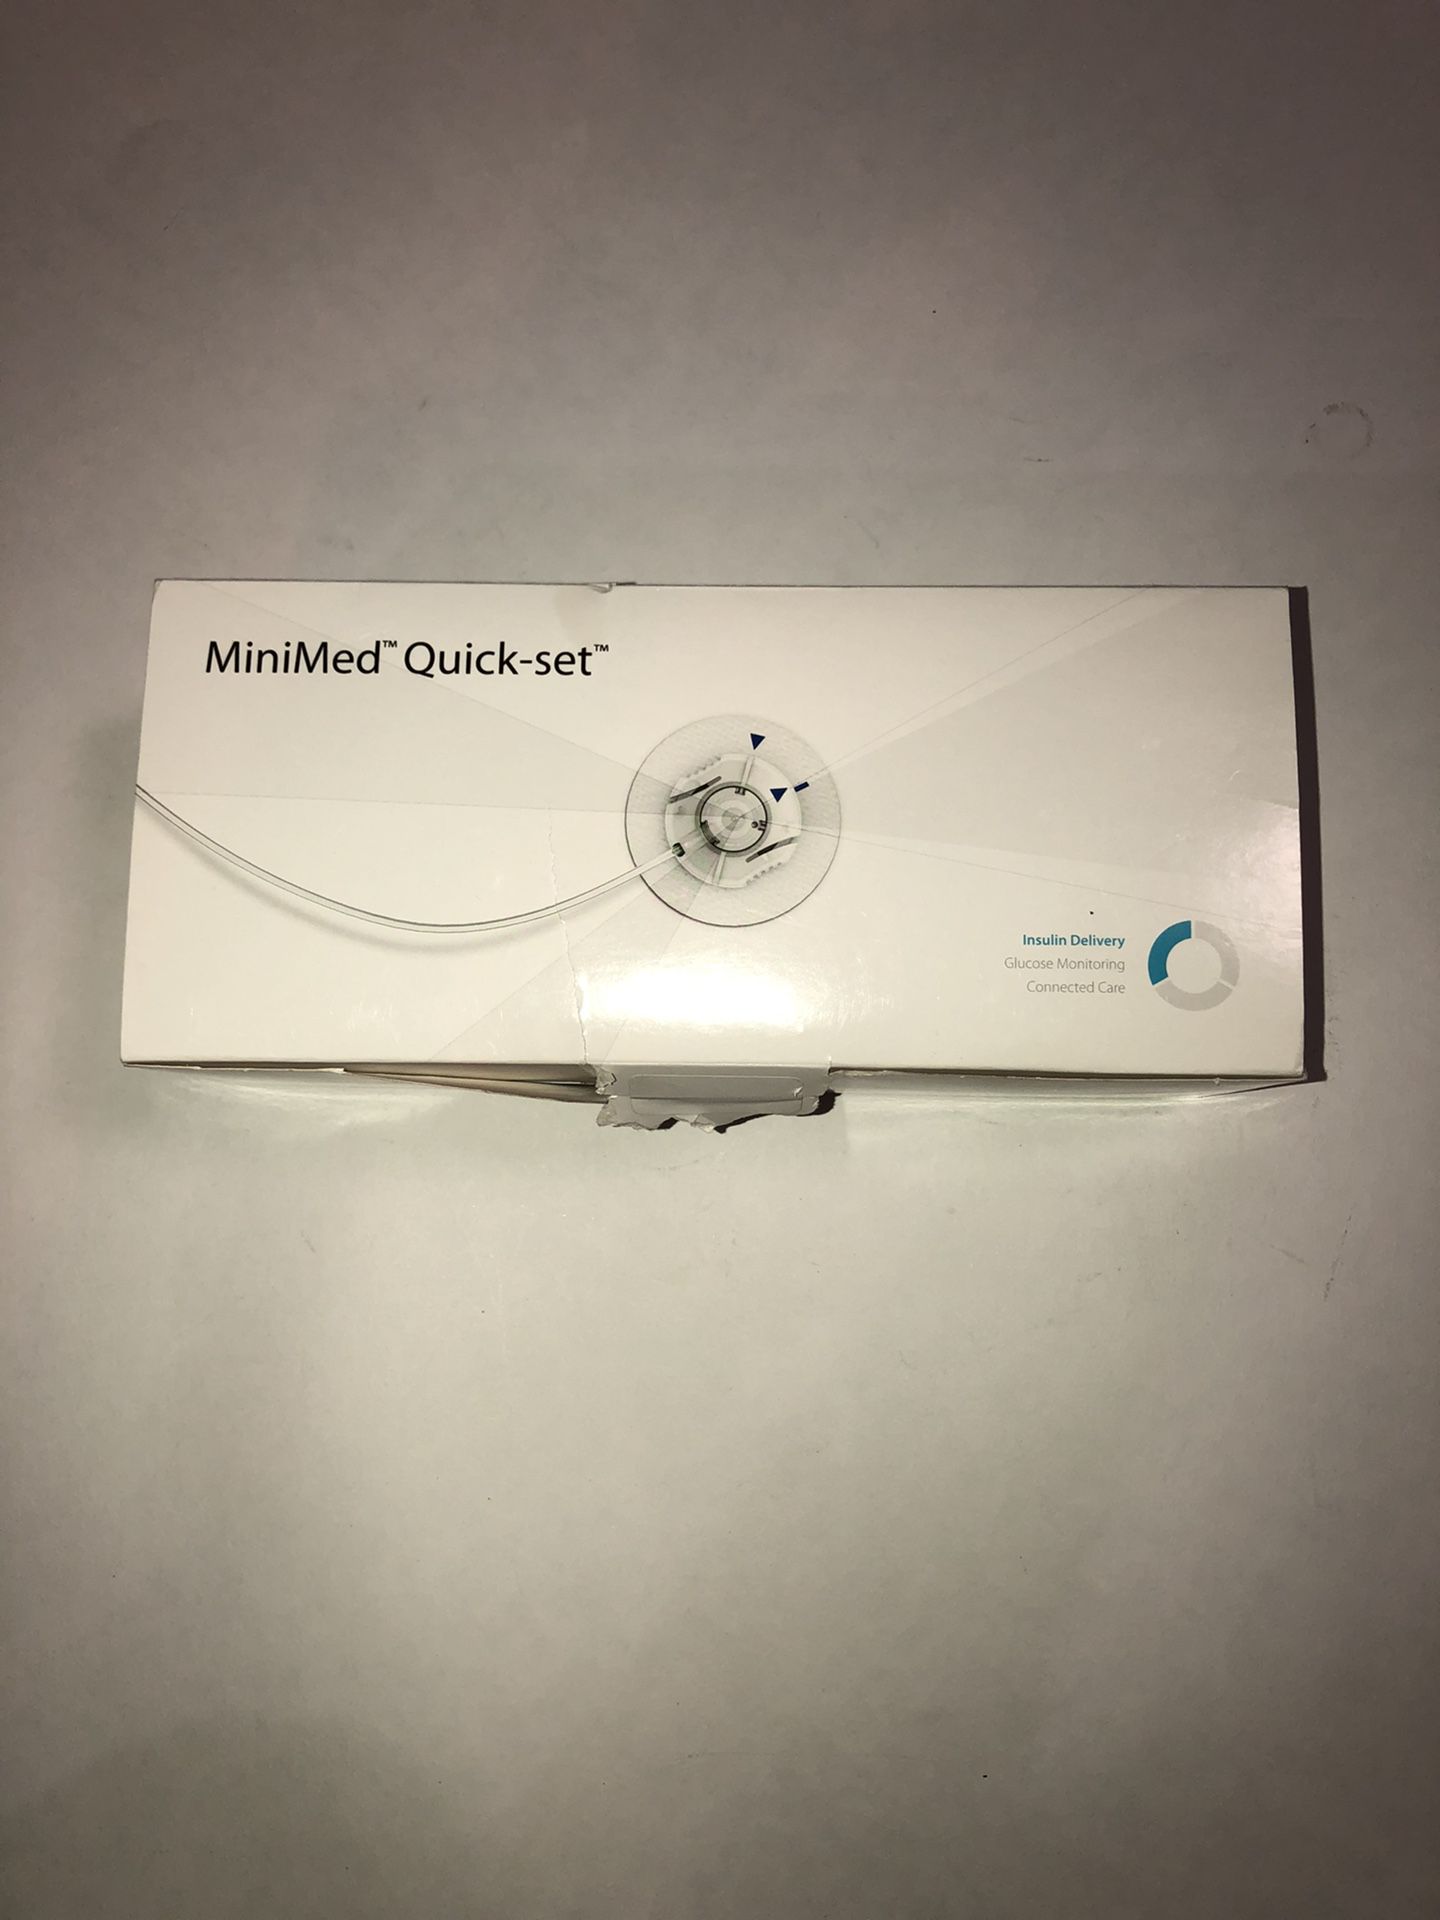 Brand New Sealed Medtronic MiniMed Quickset 10 Unopened Packages